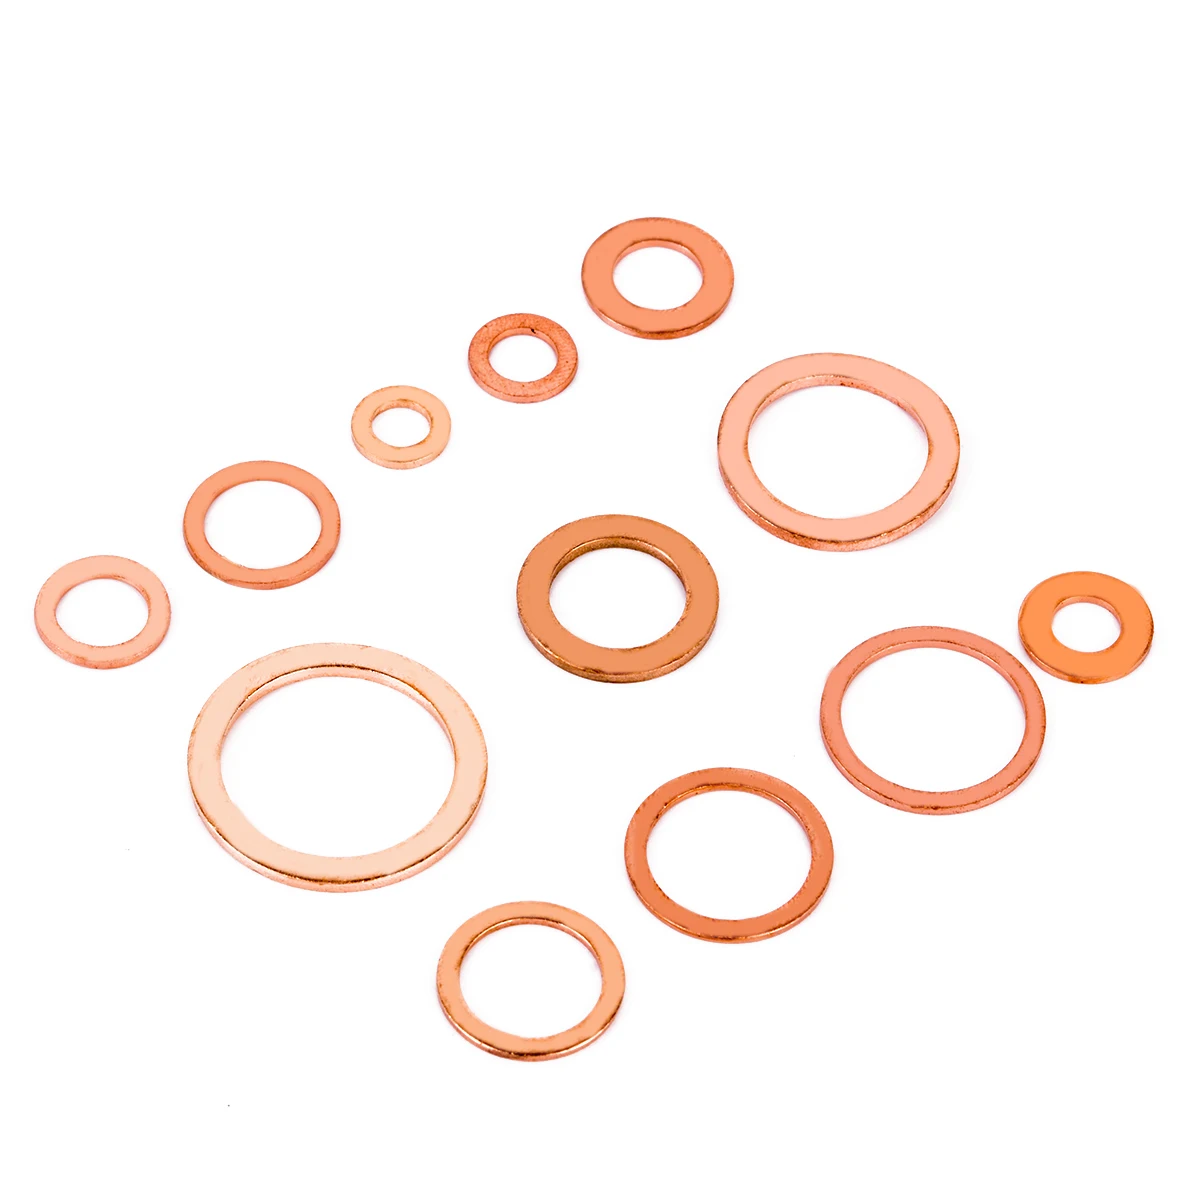 

280pcs Solid Copper Gasket Assorted Copper Washers Sealing Ring Set with Case 12 Sizes M5-M20